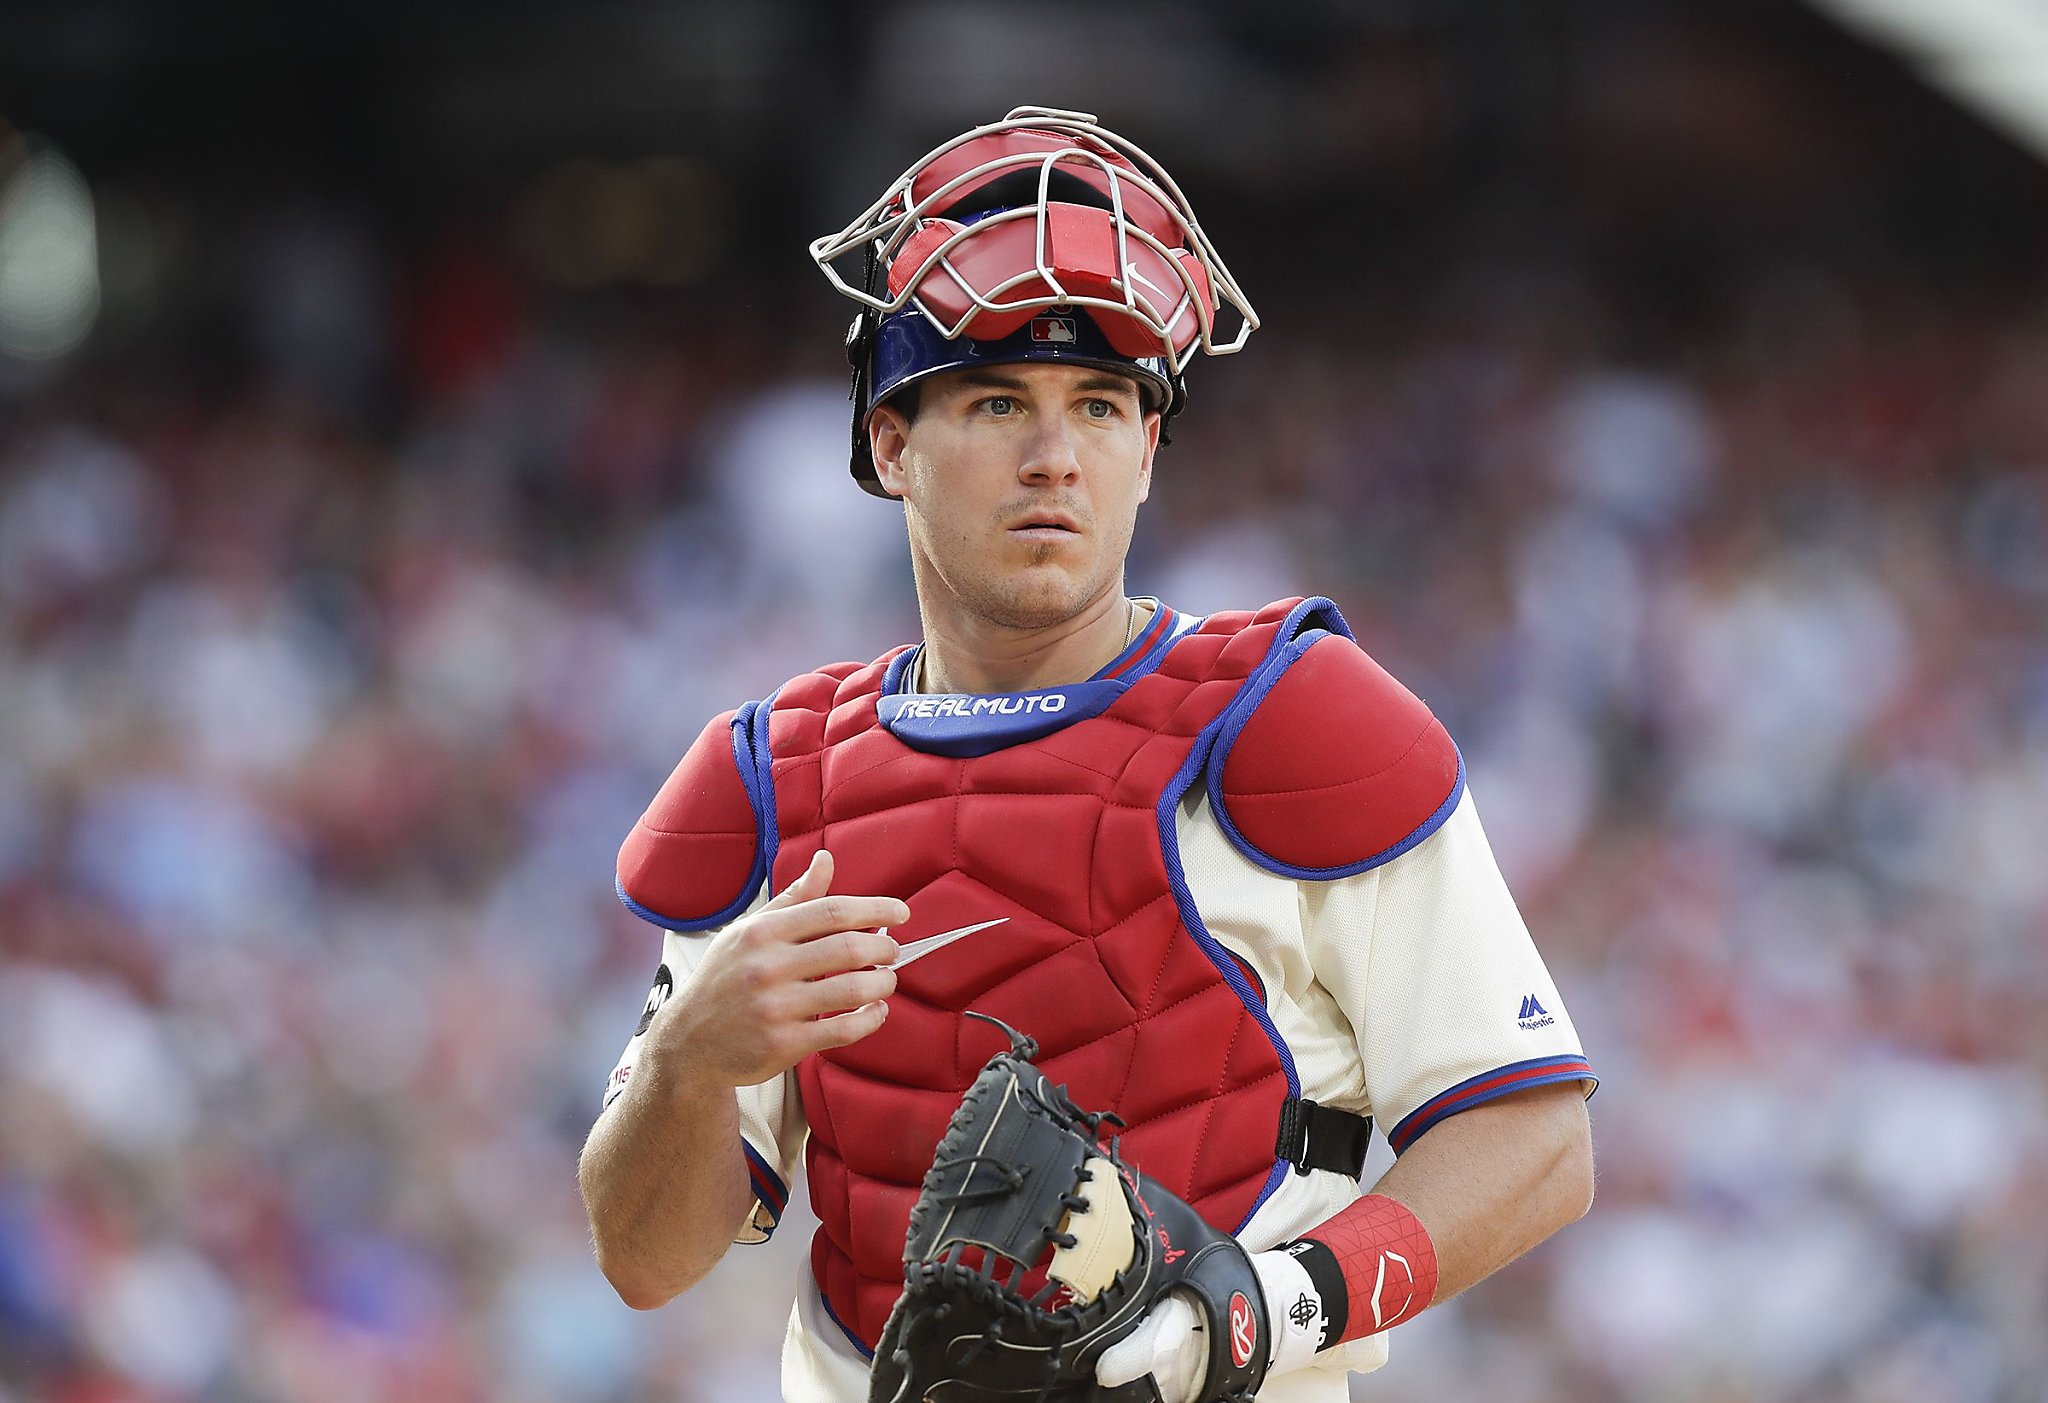 AP sources: Phillies, J.T. Realmuto agree on $115.5 million deal